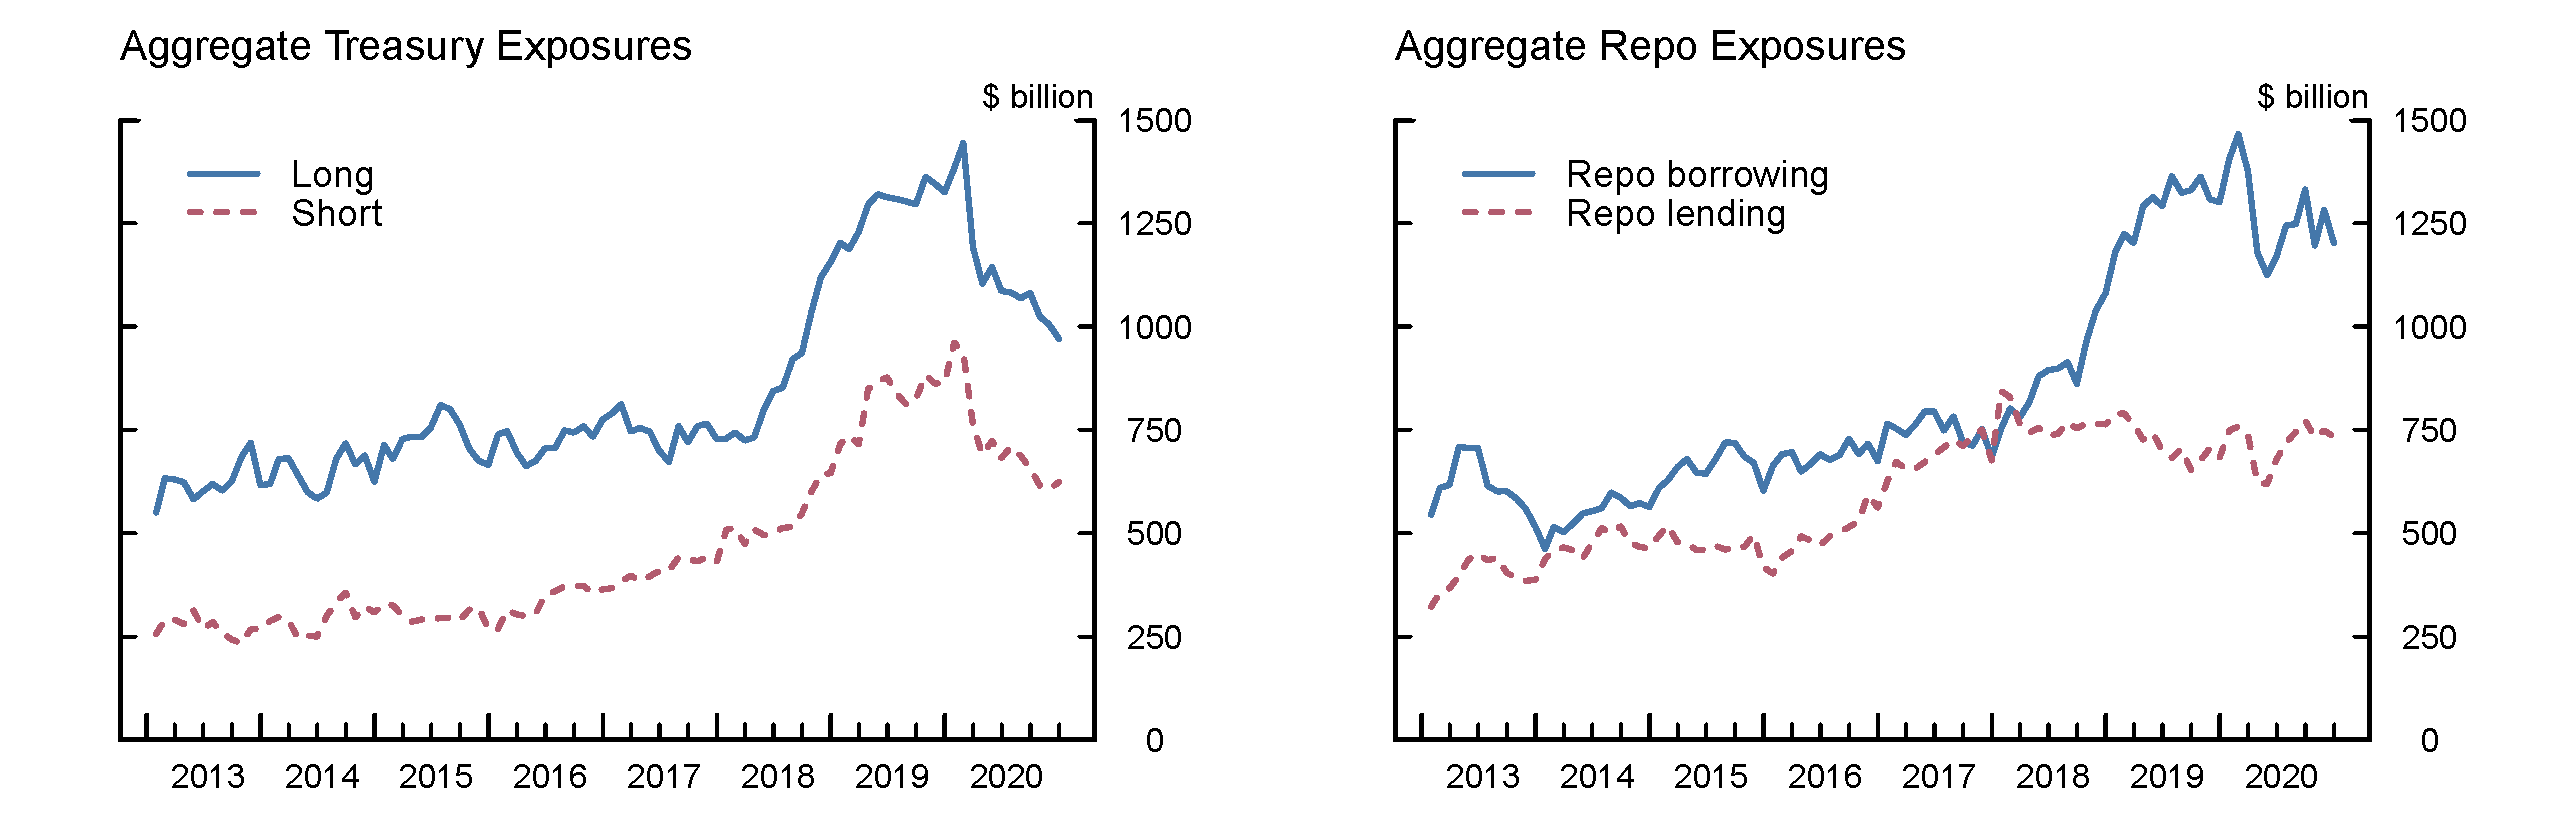 Figure 1. U.S. Treasury exposures and repo exposures of QHFs. See accessible link for data.